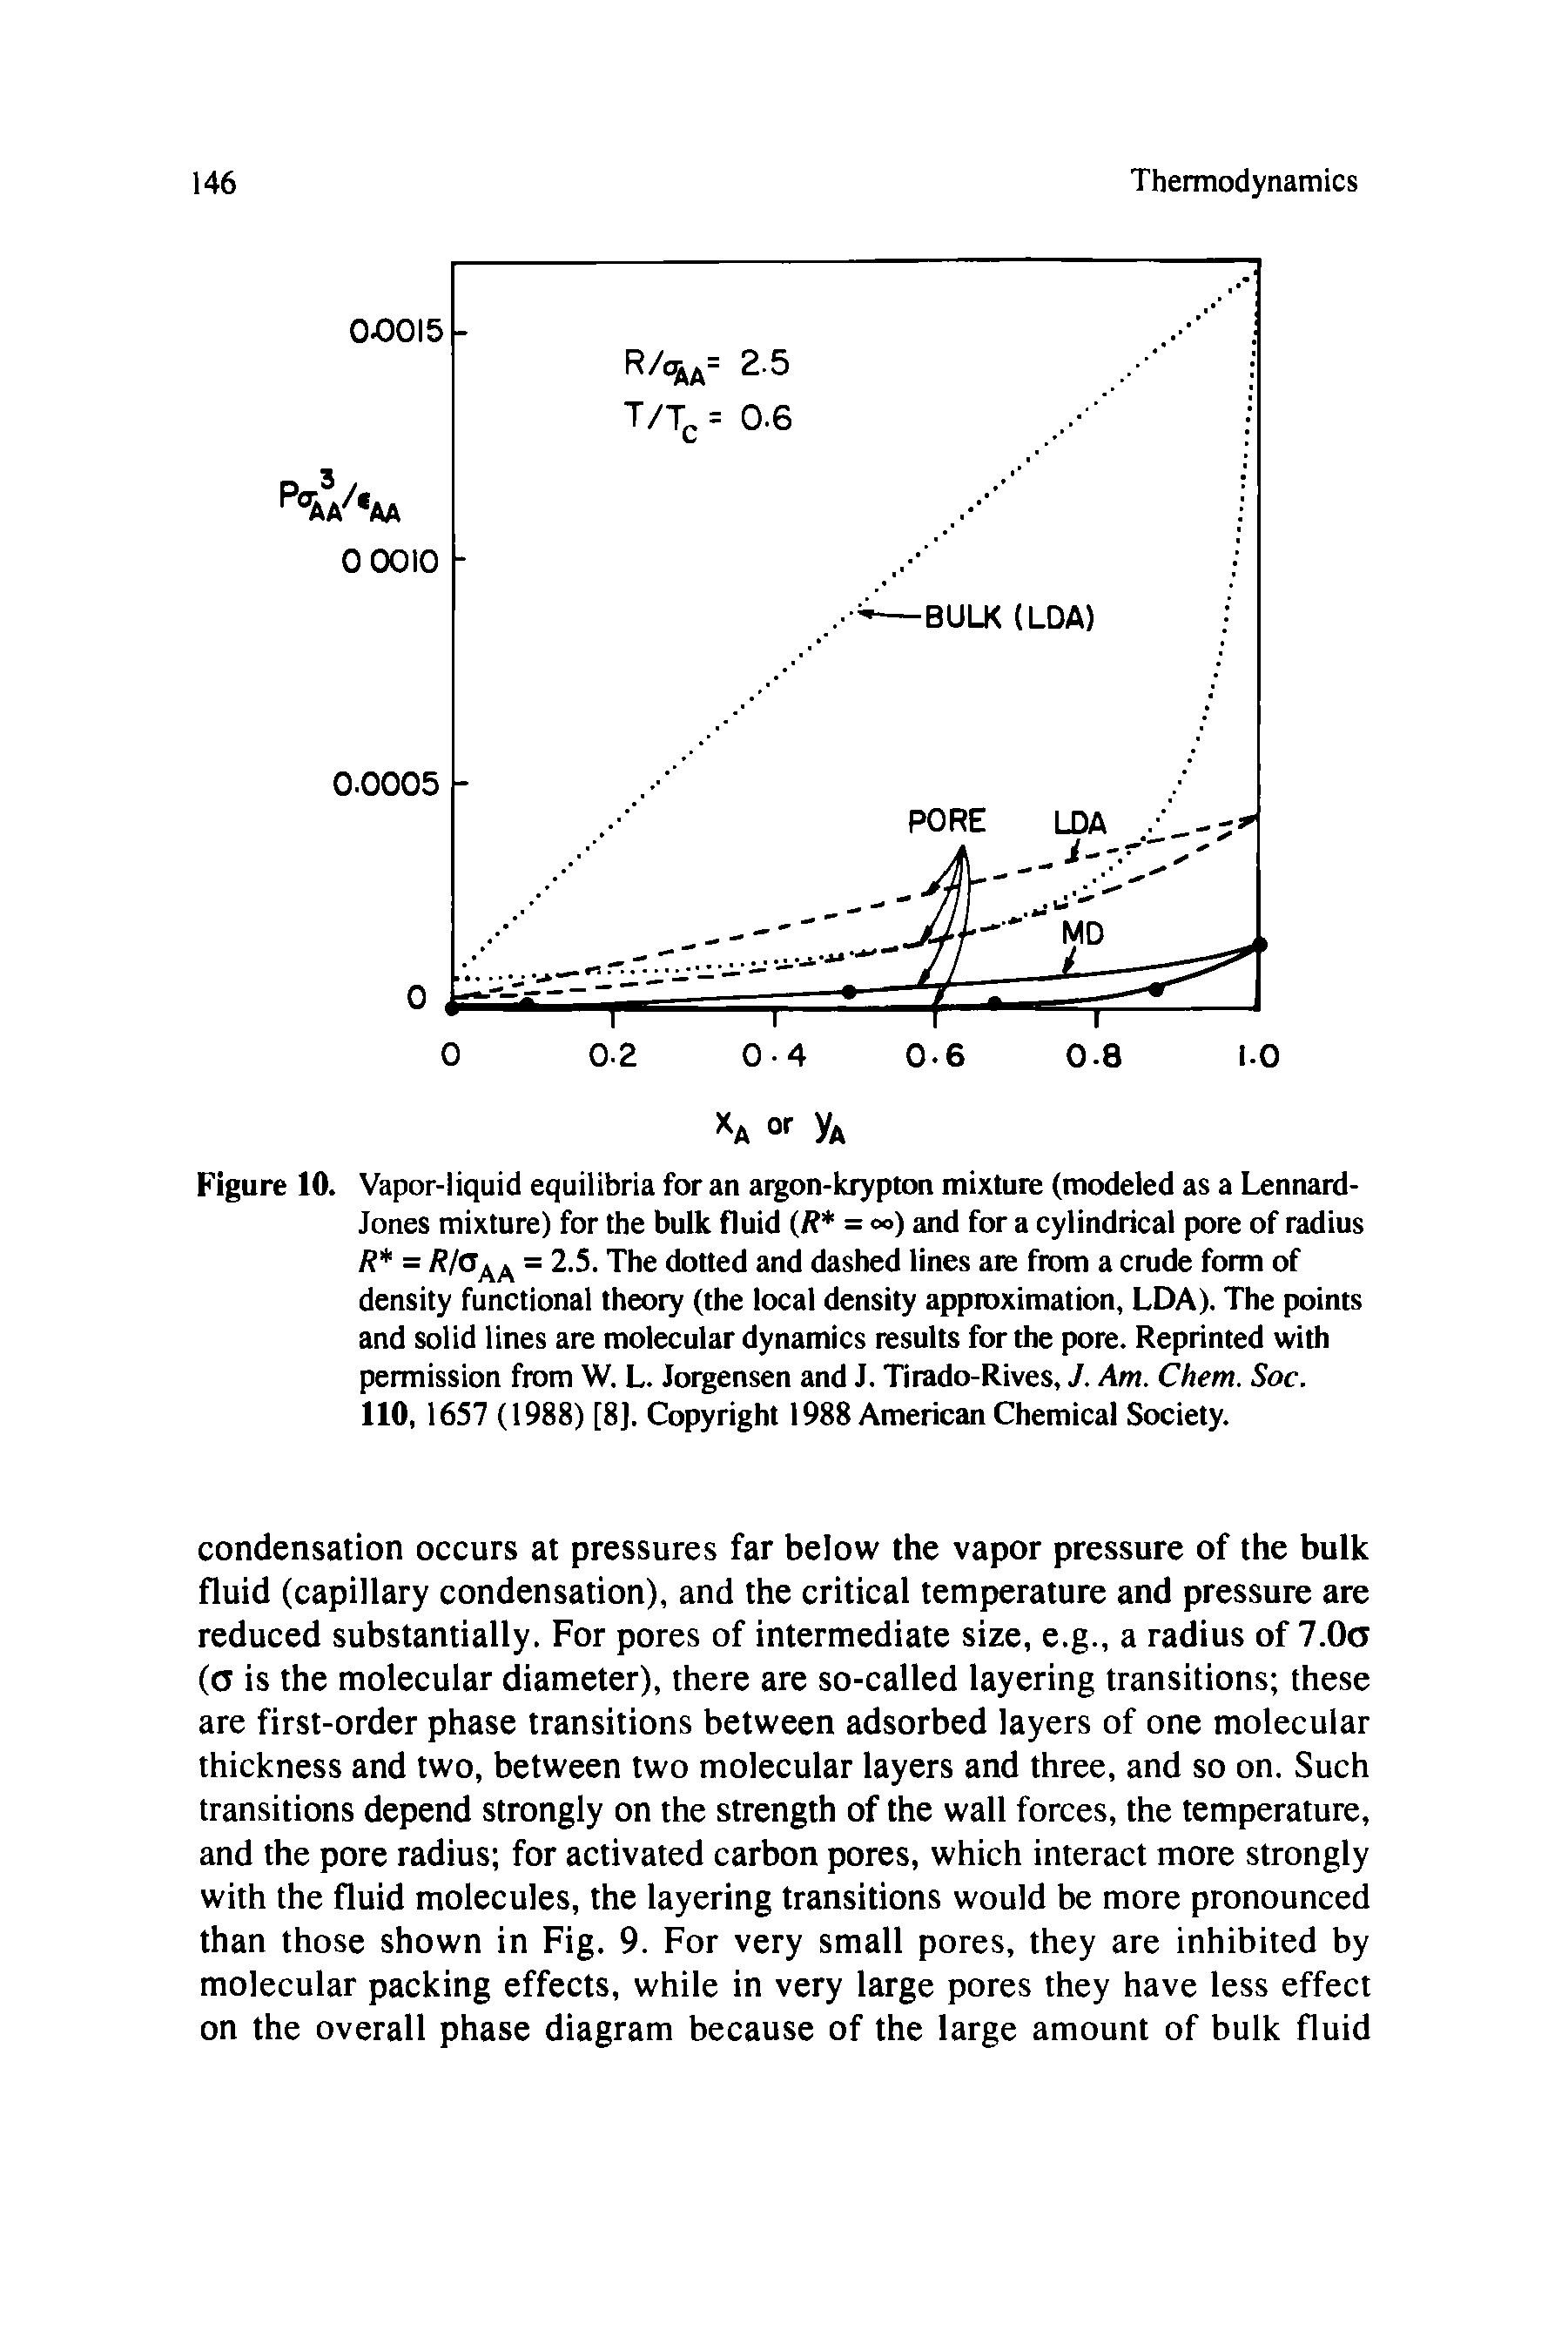 Figure 10. Vapor-liquid equilibria for an argon-krypton mixture (modeled as a Lennard-Jones mixture) for the bulk fluid (R = >) and for a cylindrical pore of radius R = / /Oaa = 2.5. The dotted and dashed lines are from a crude form of density functional theory (the local density approximation, LDA). The points and solid lines are molecular dynamics results for the pore. Reprinted with permission from W. L. Jorgensen and J. Tirado-Rives, J. Am. Chem. Soc.